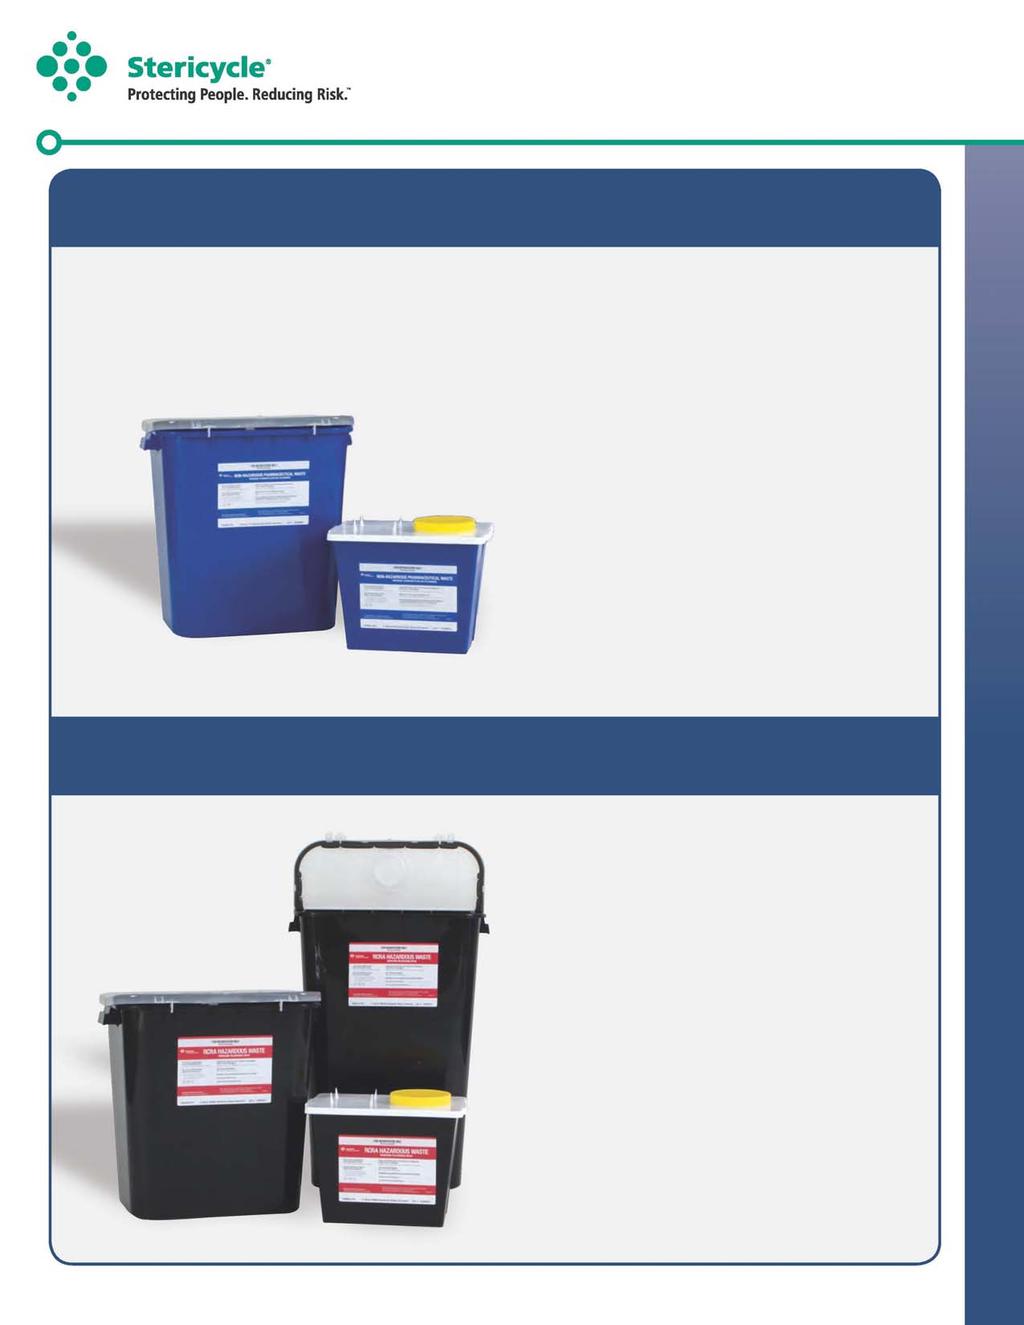 Stericycle Pharmaceutical Waste Containers For use with non-hazardous pharmaceutical waste Blue containers make it easy to identify and segregate non-hazardous pharmaceutical waste Available in a